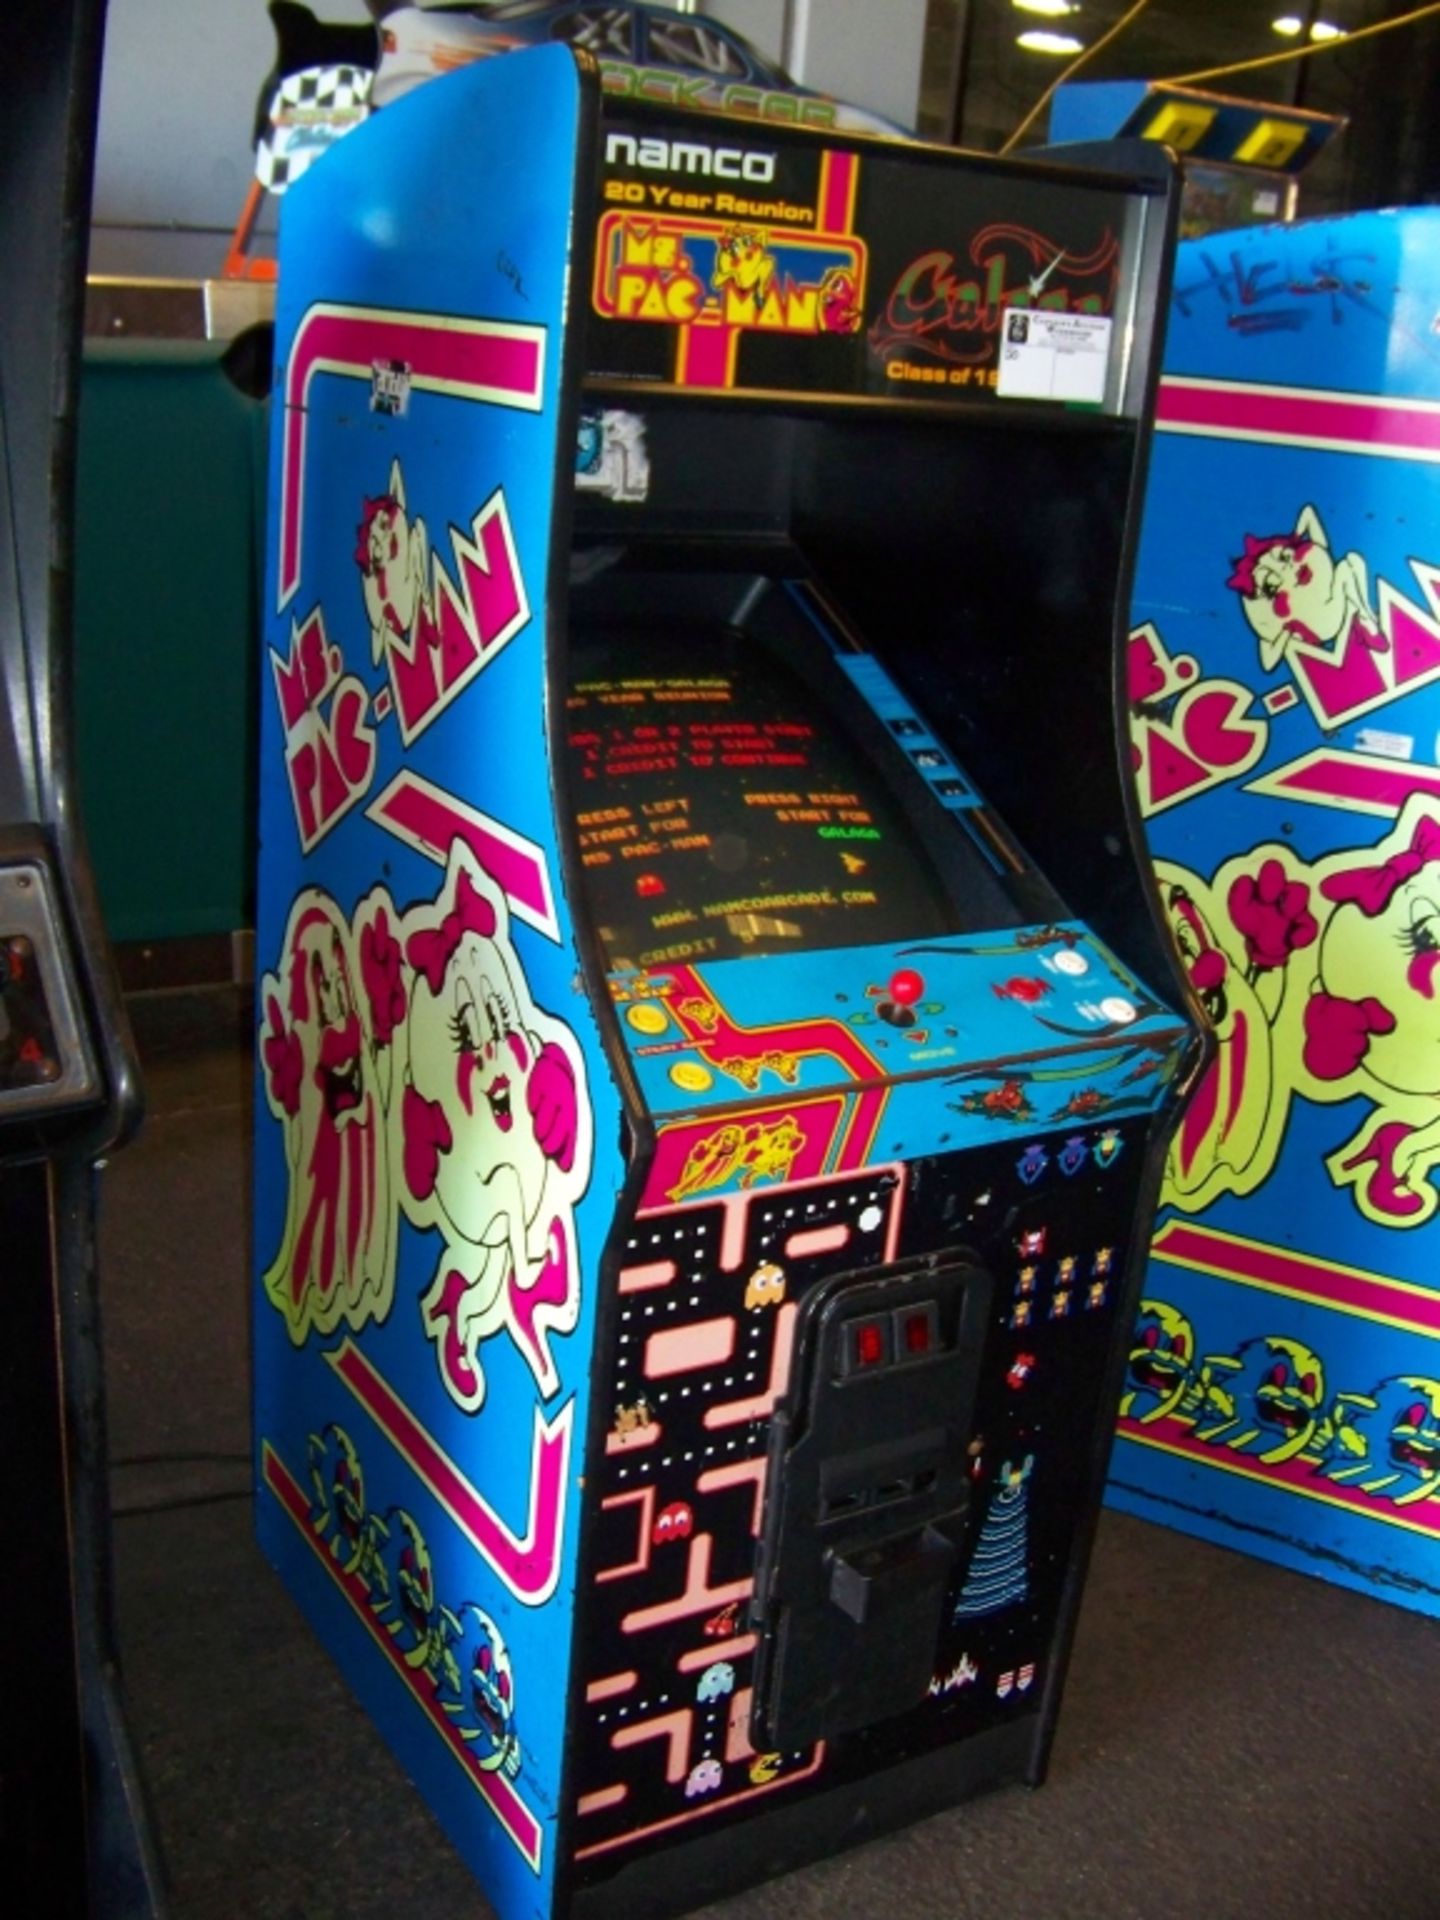 MS. PACMAN GALAGA CLASS OF 1981 ARCADE GAME - Image 2 of 4